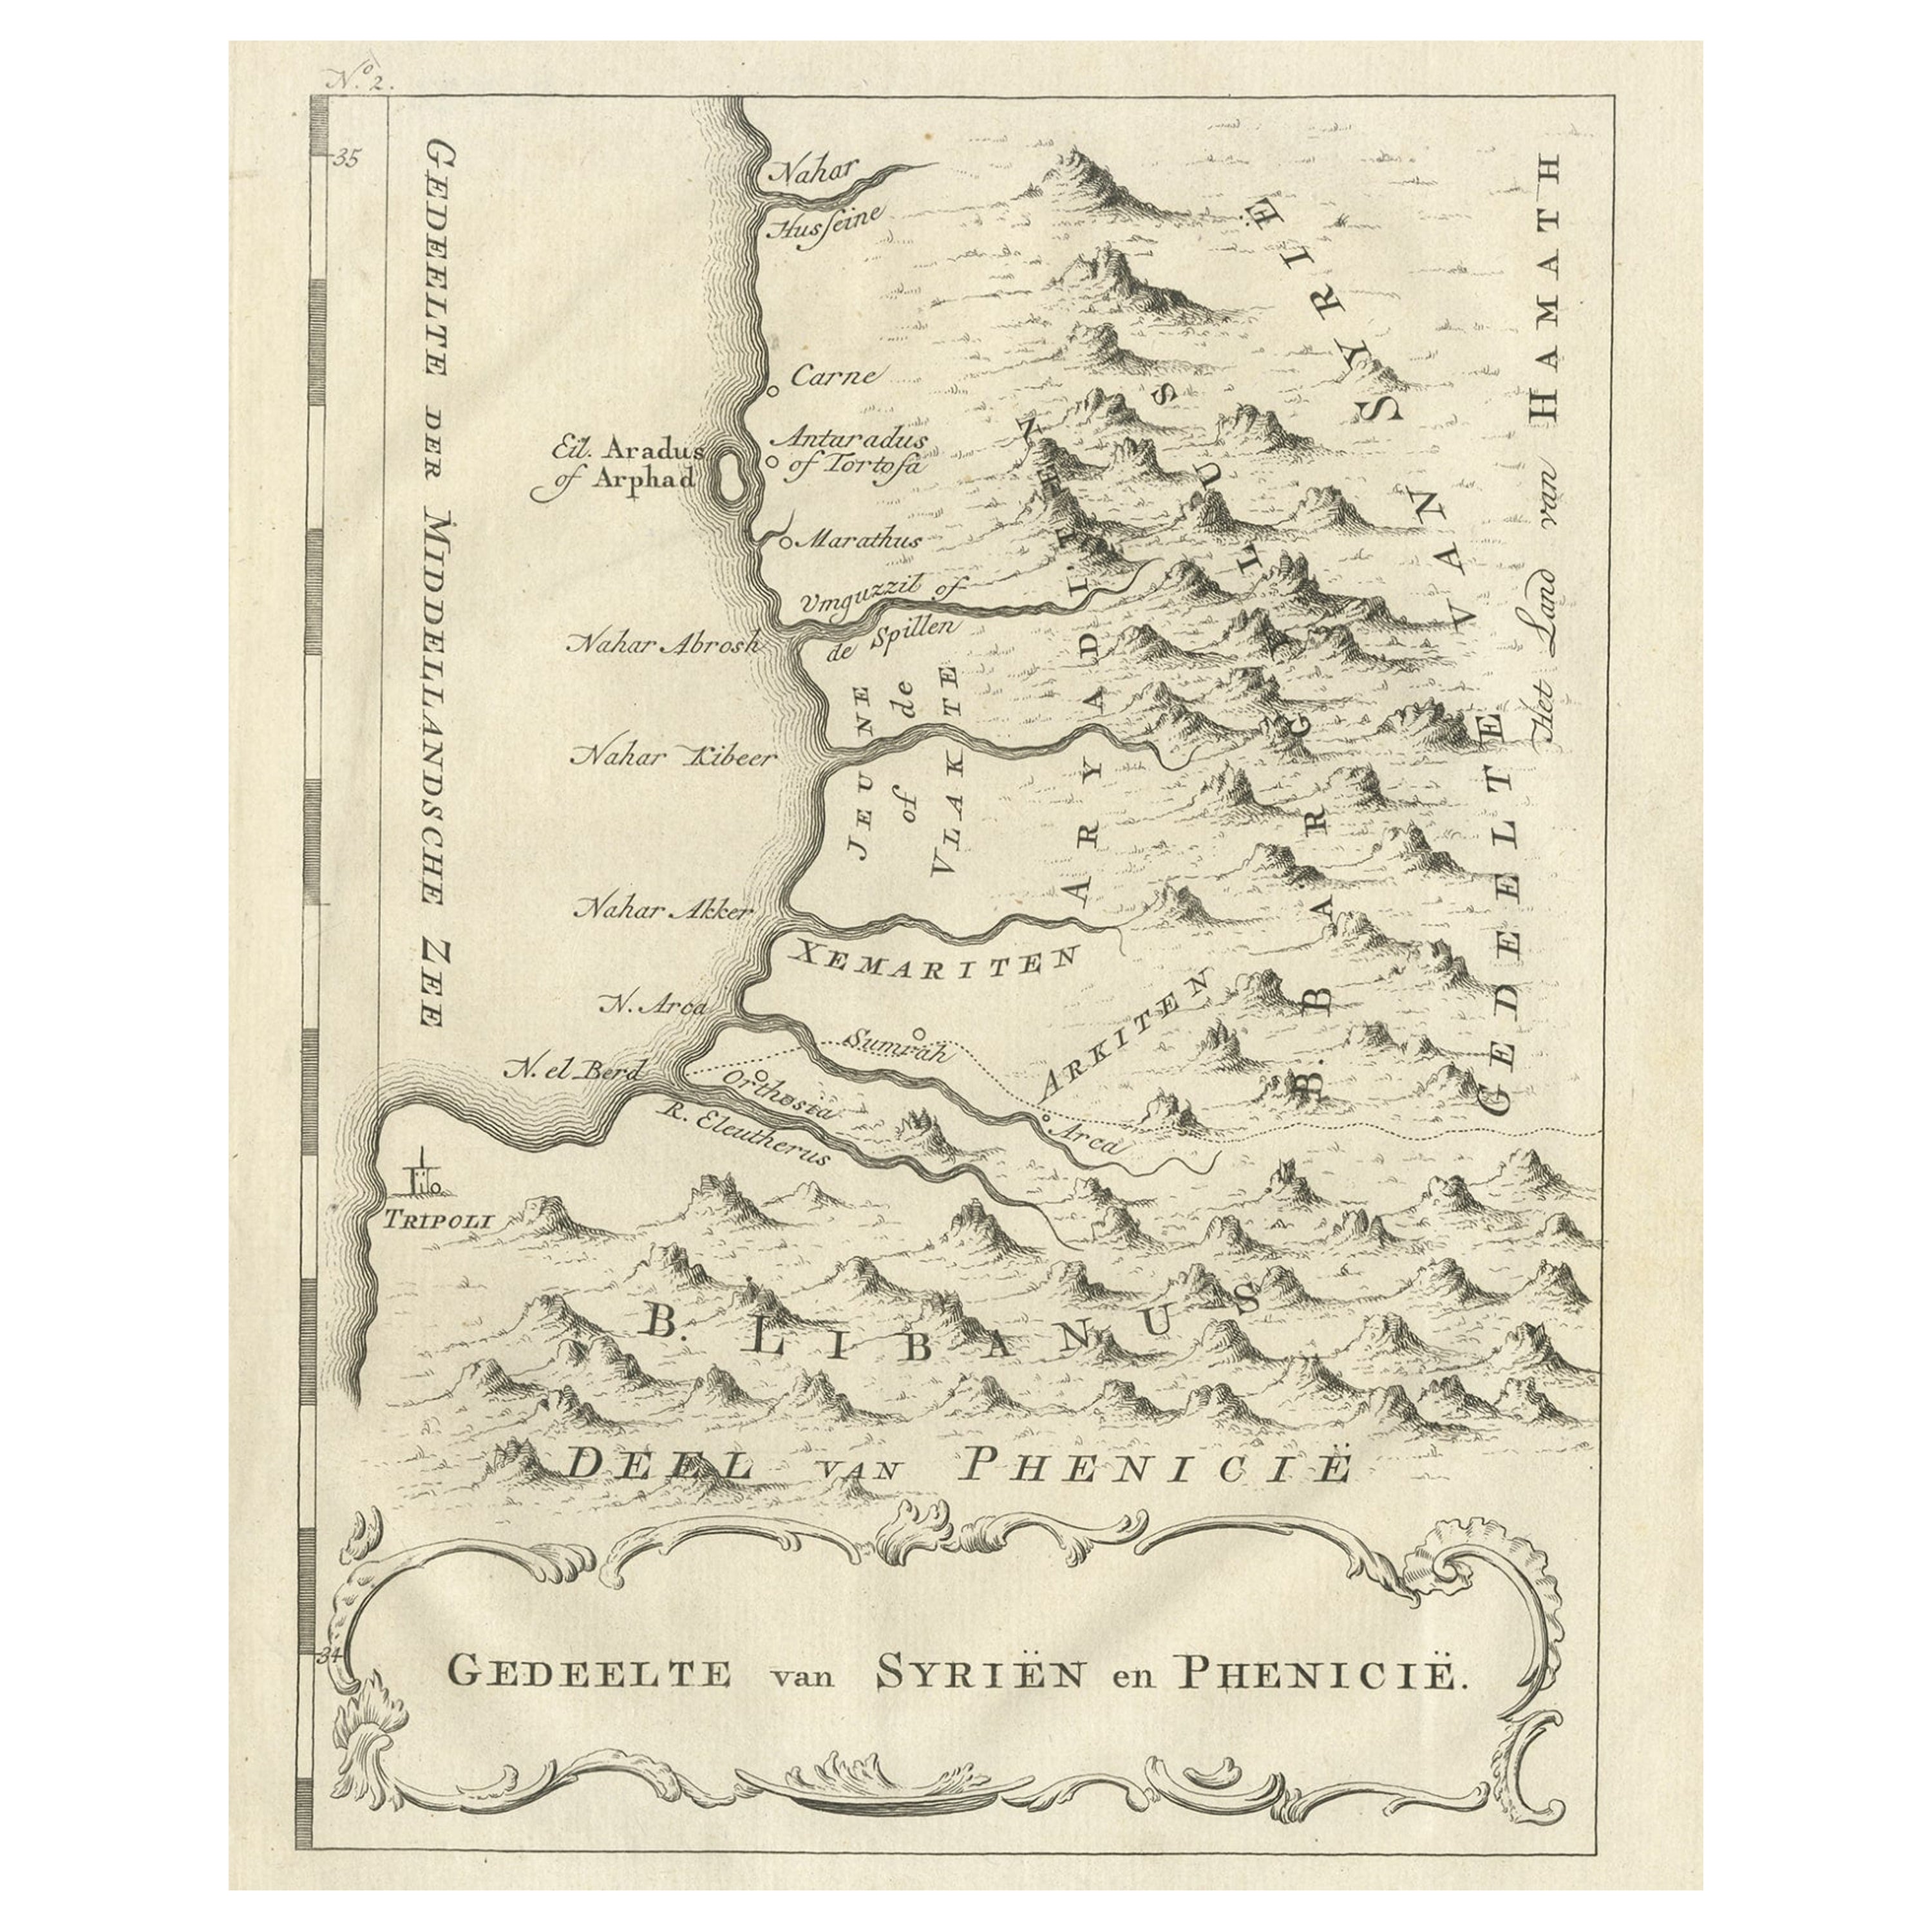 Old Dutch Map of Part of Syria and Phoenicia, 1773